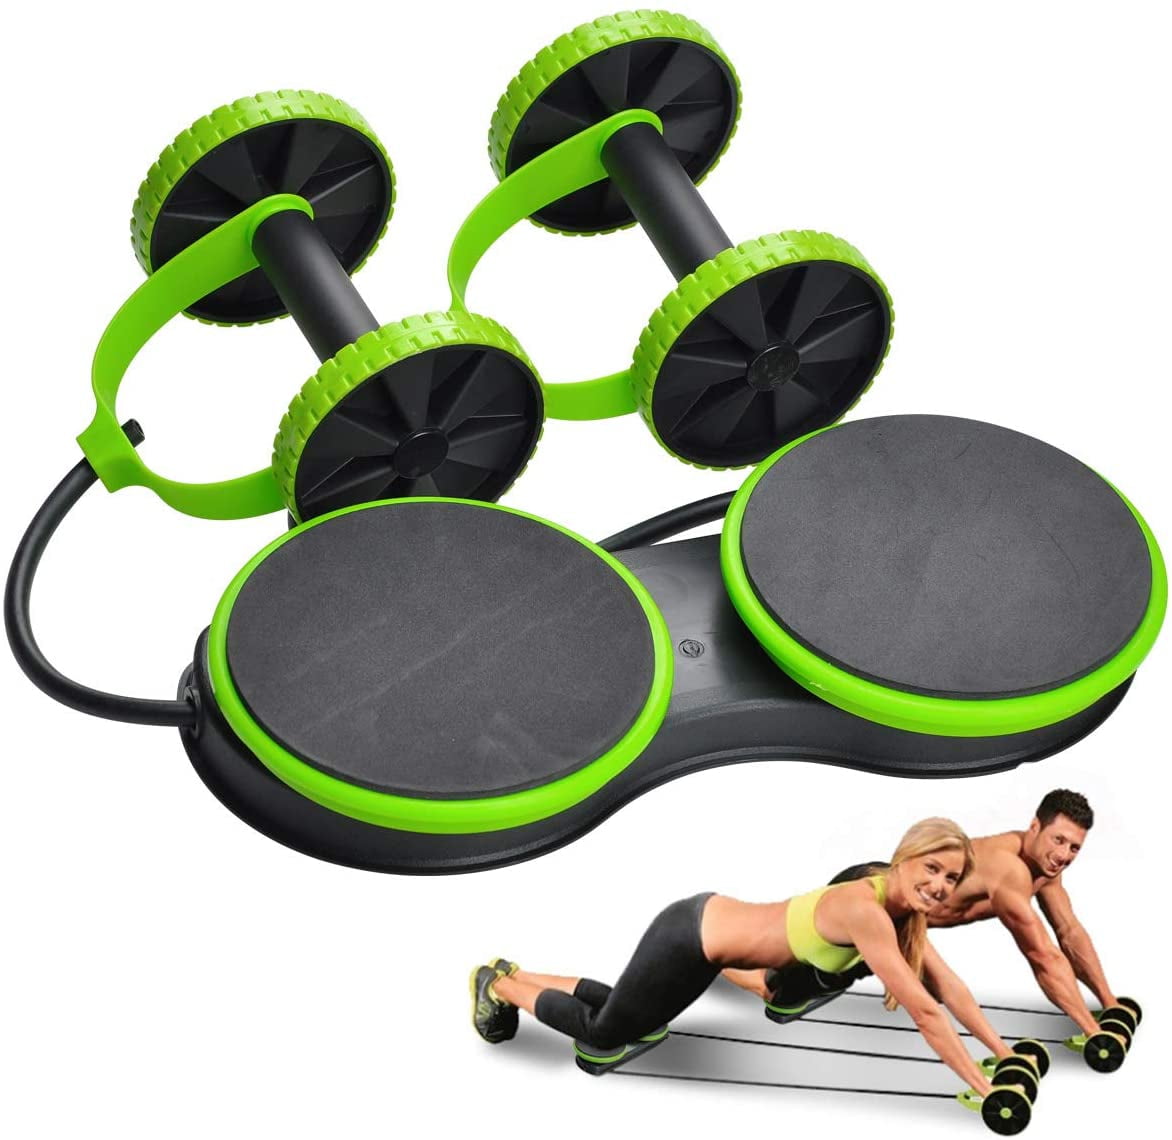 Abdominal Roller Exercise Wheel Home Workout Equipment Muscle Trainer one 